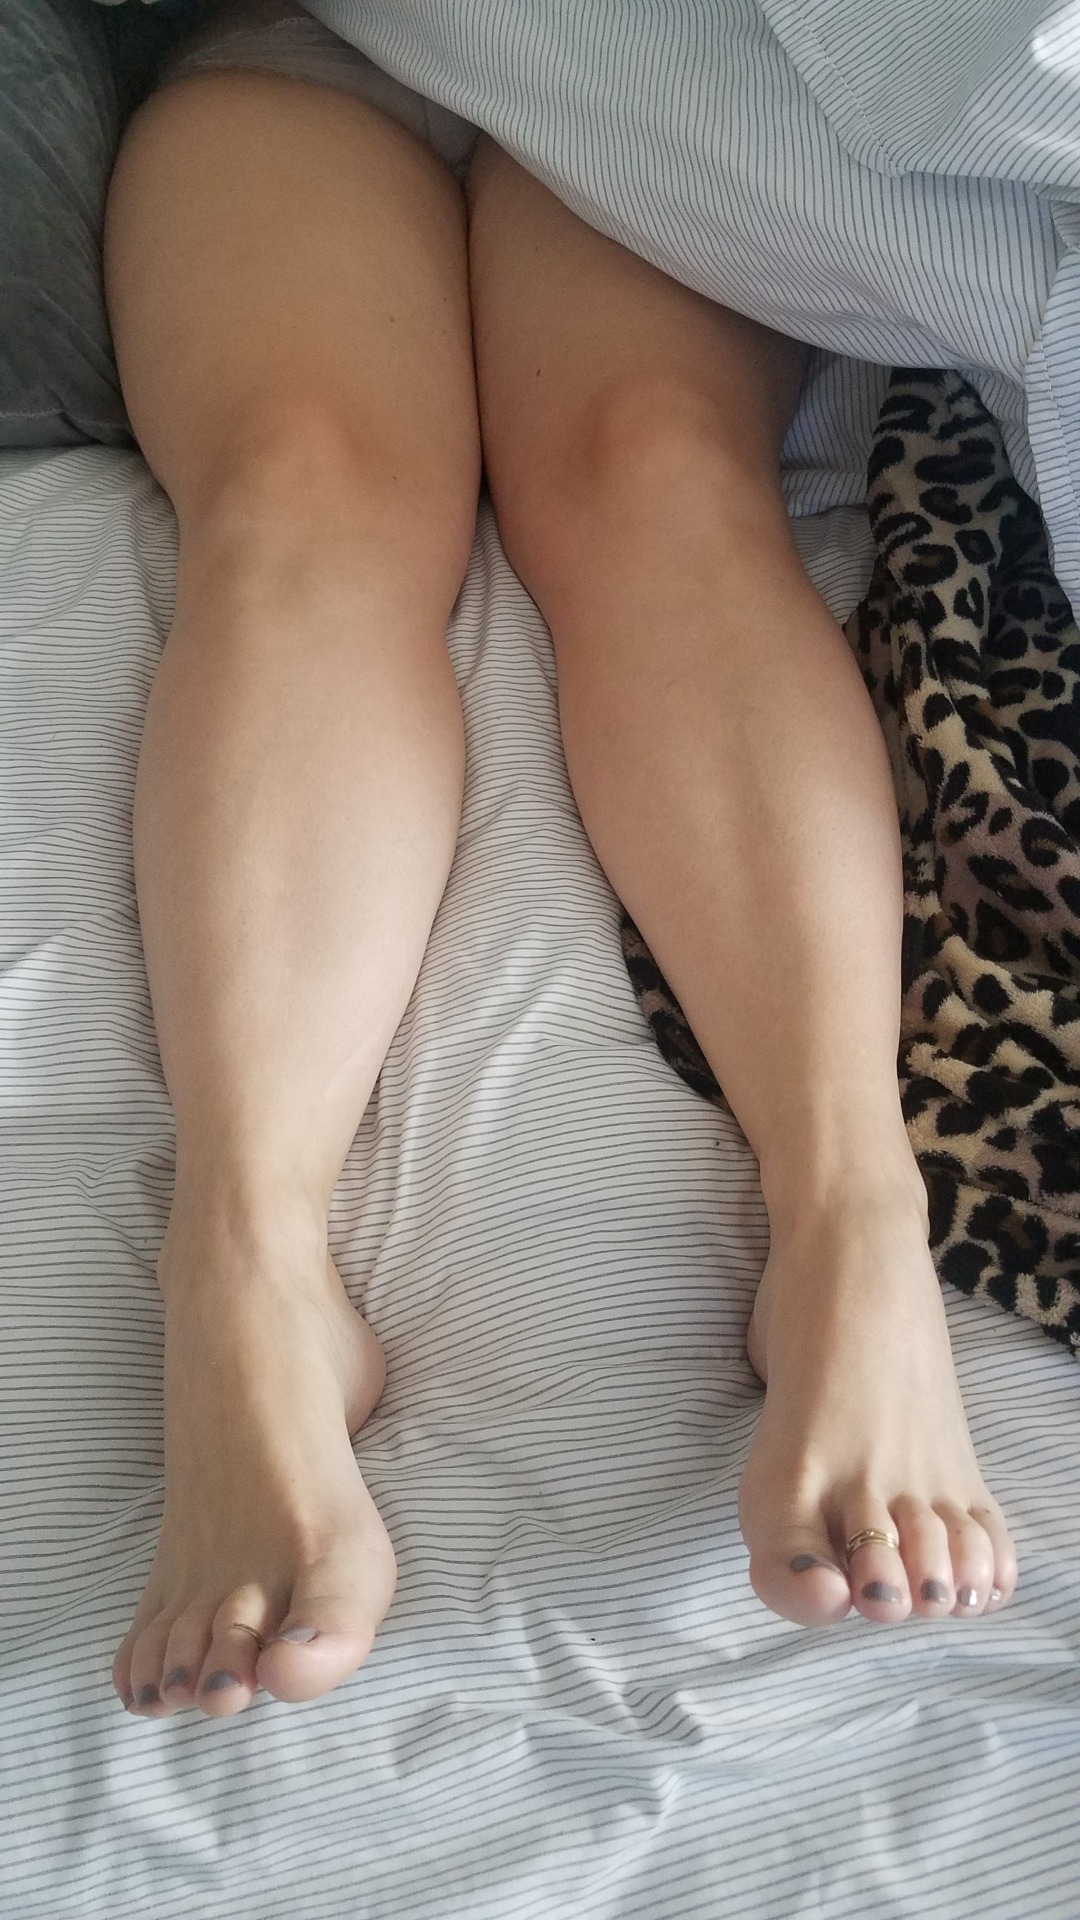 myprettywifesfeet:My pretty wifes beautiful legs and feet asleep in bed this morning.please